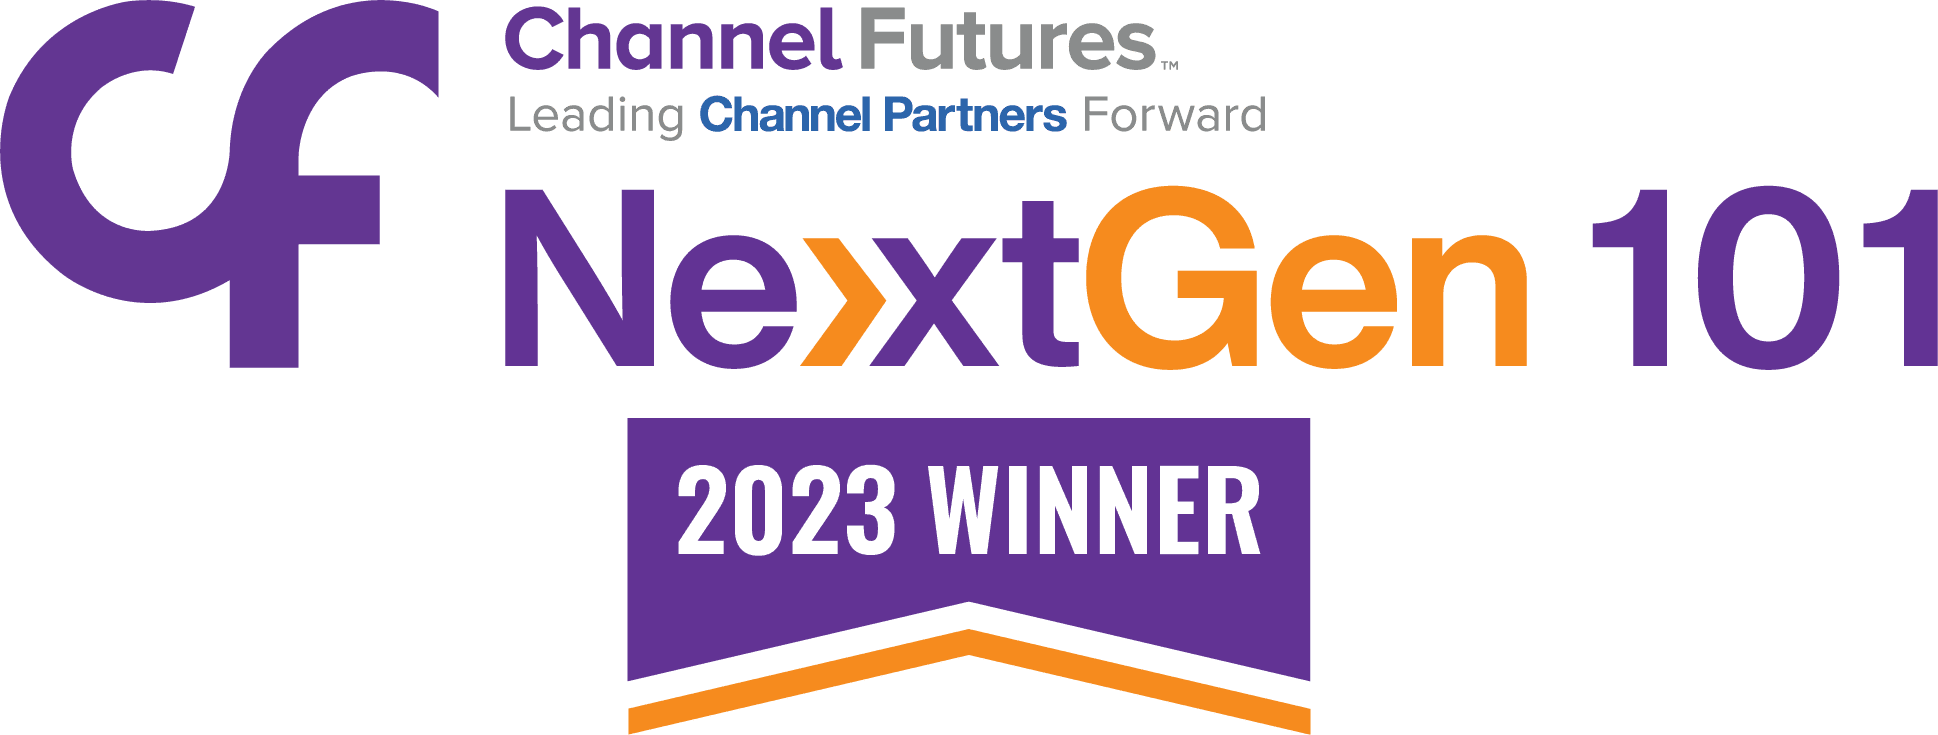 Channel Futures NextGen 101 2023 winner badge for business that provides IT consulting and services.